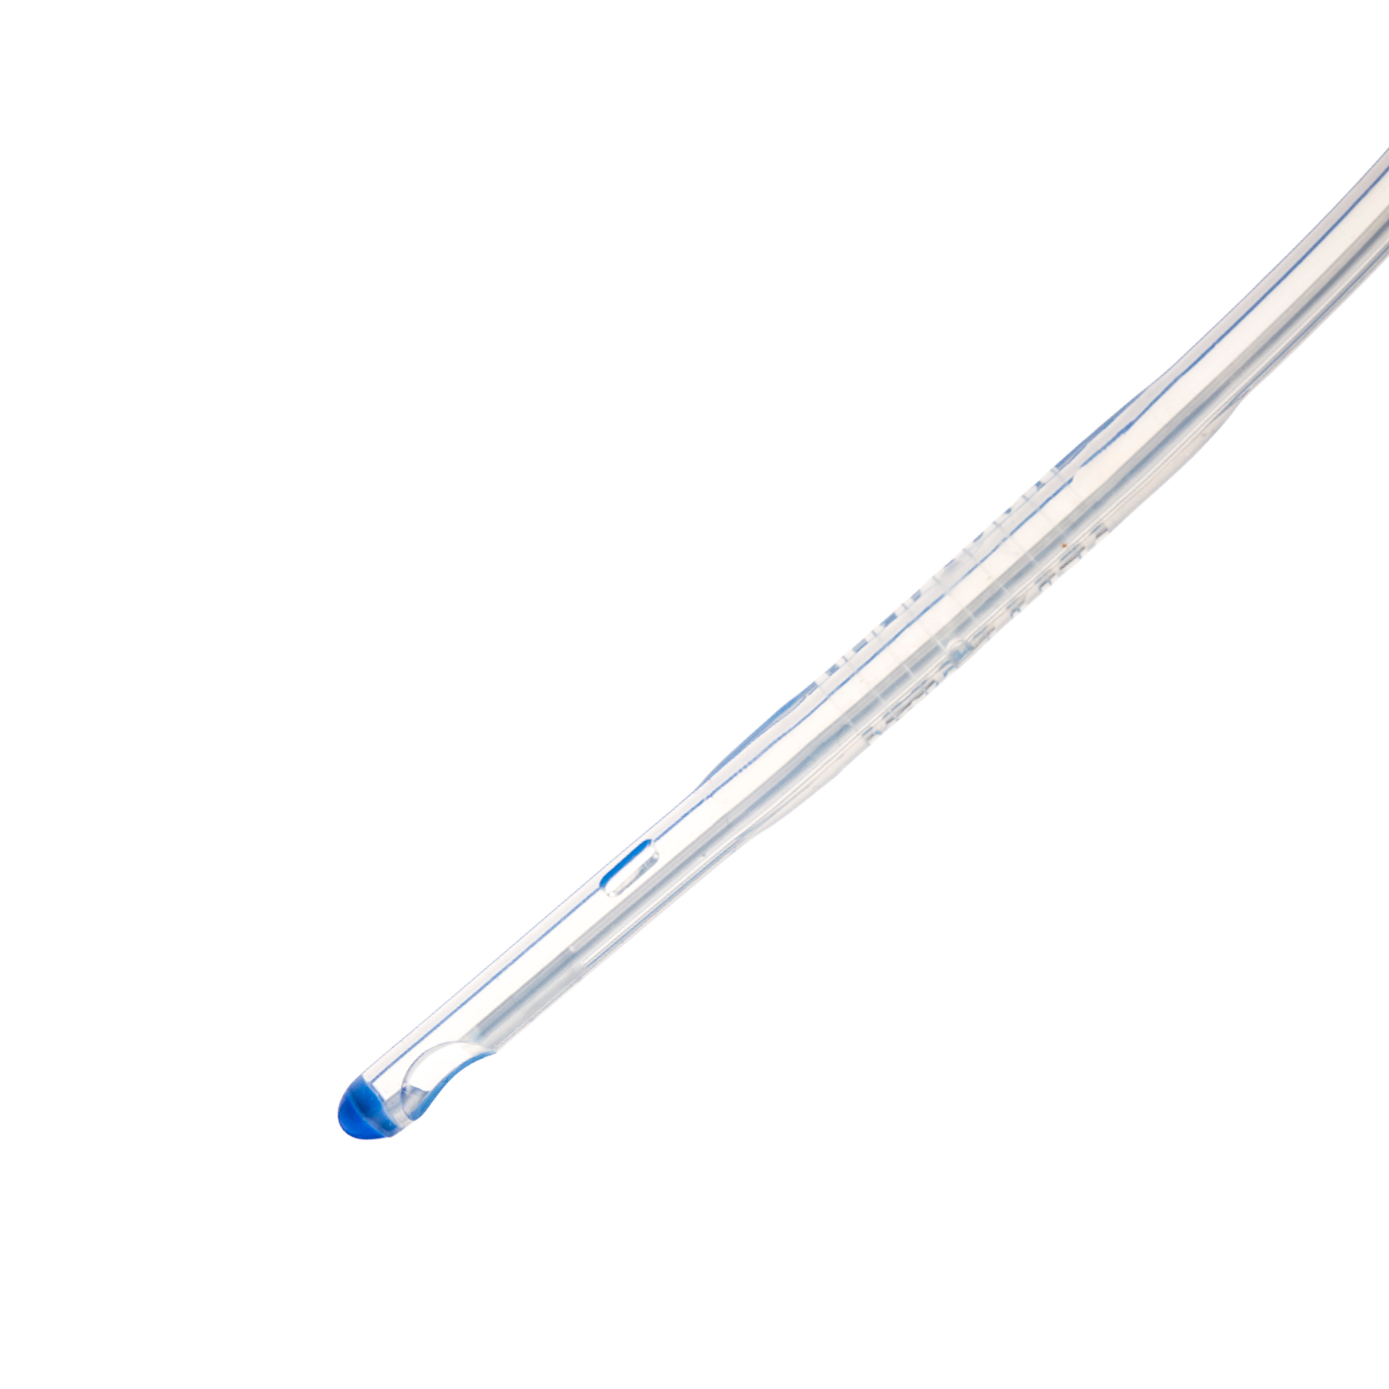 All silicone Foley Catheter with Couvelaire Tip